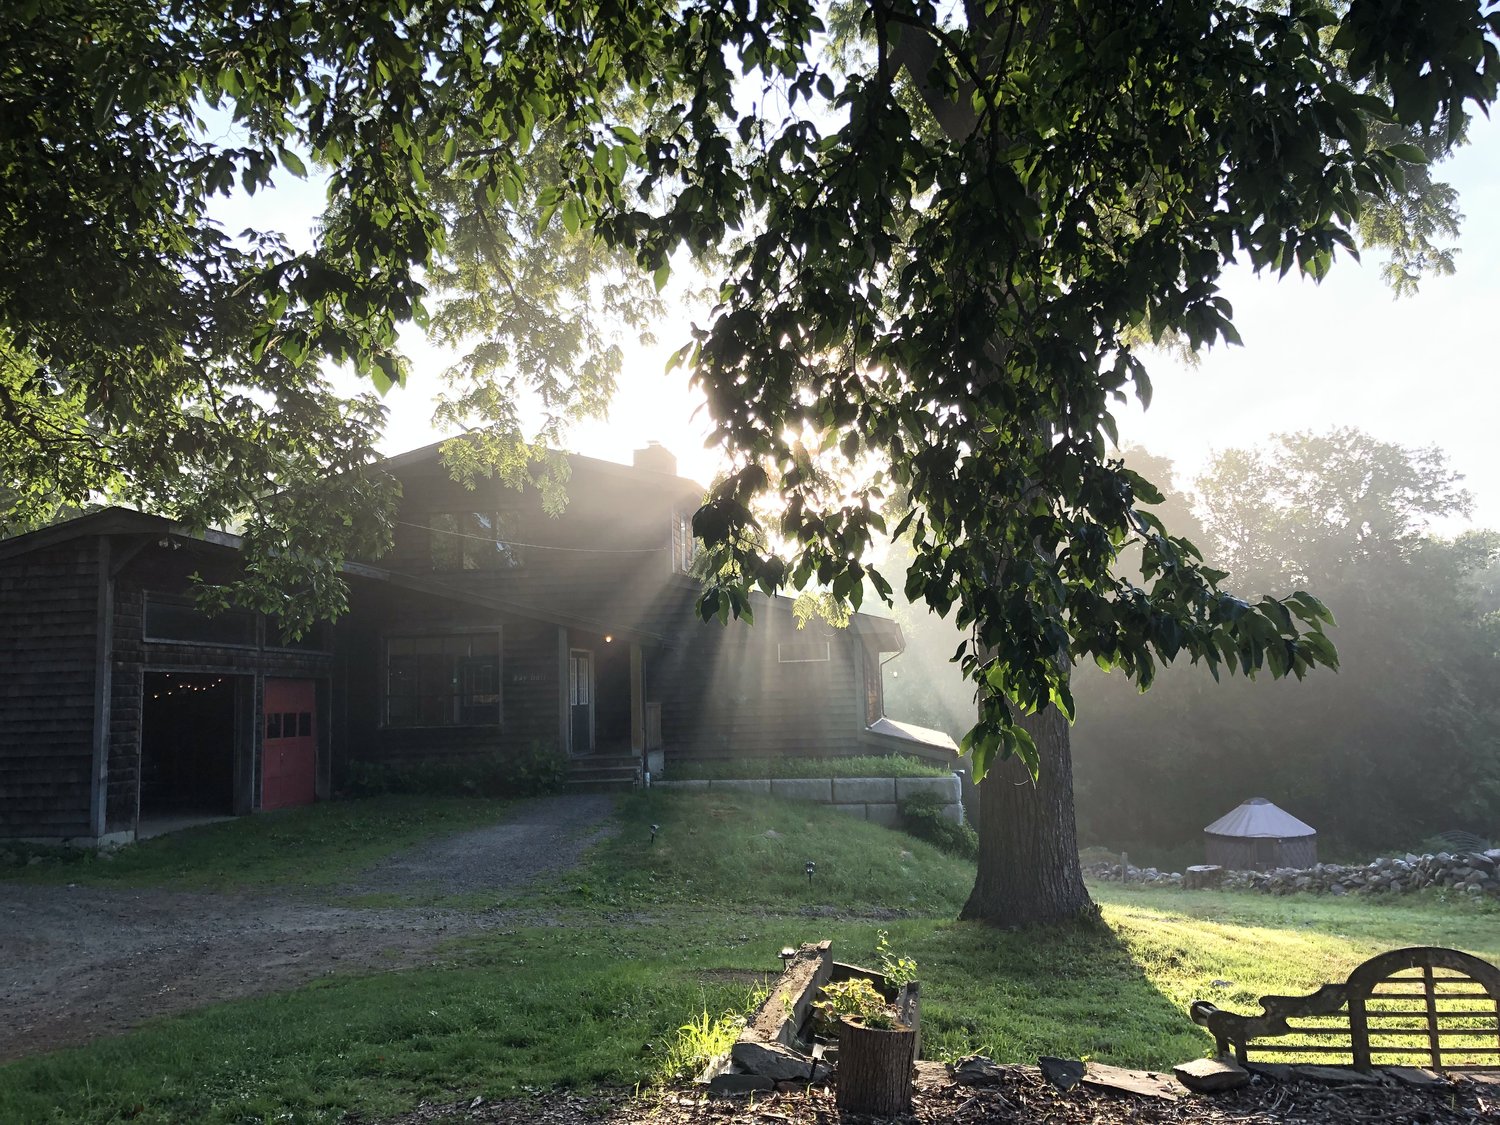 SPACE on Ryder Farm offers residencies for those interested in the intersections of art, activism, and agriculture. Deadline to apply is January 5.